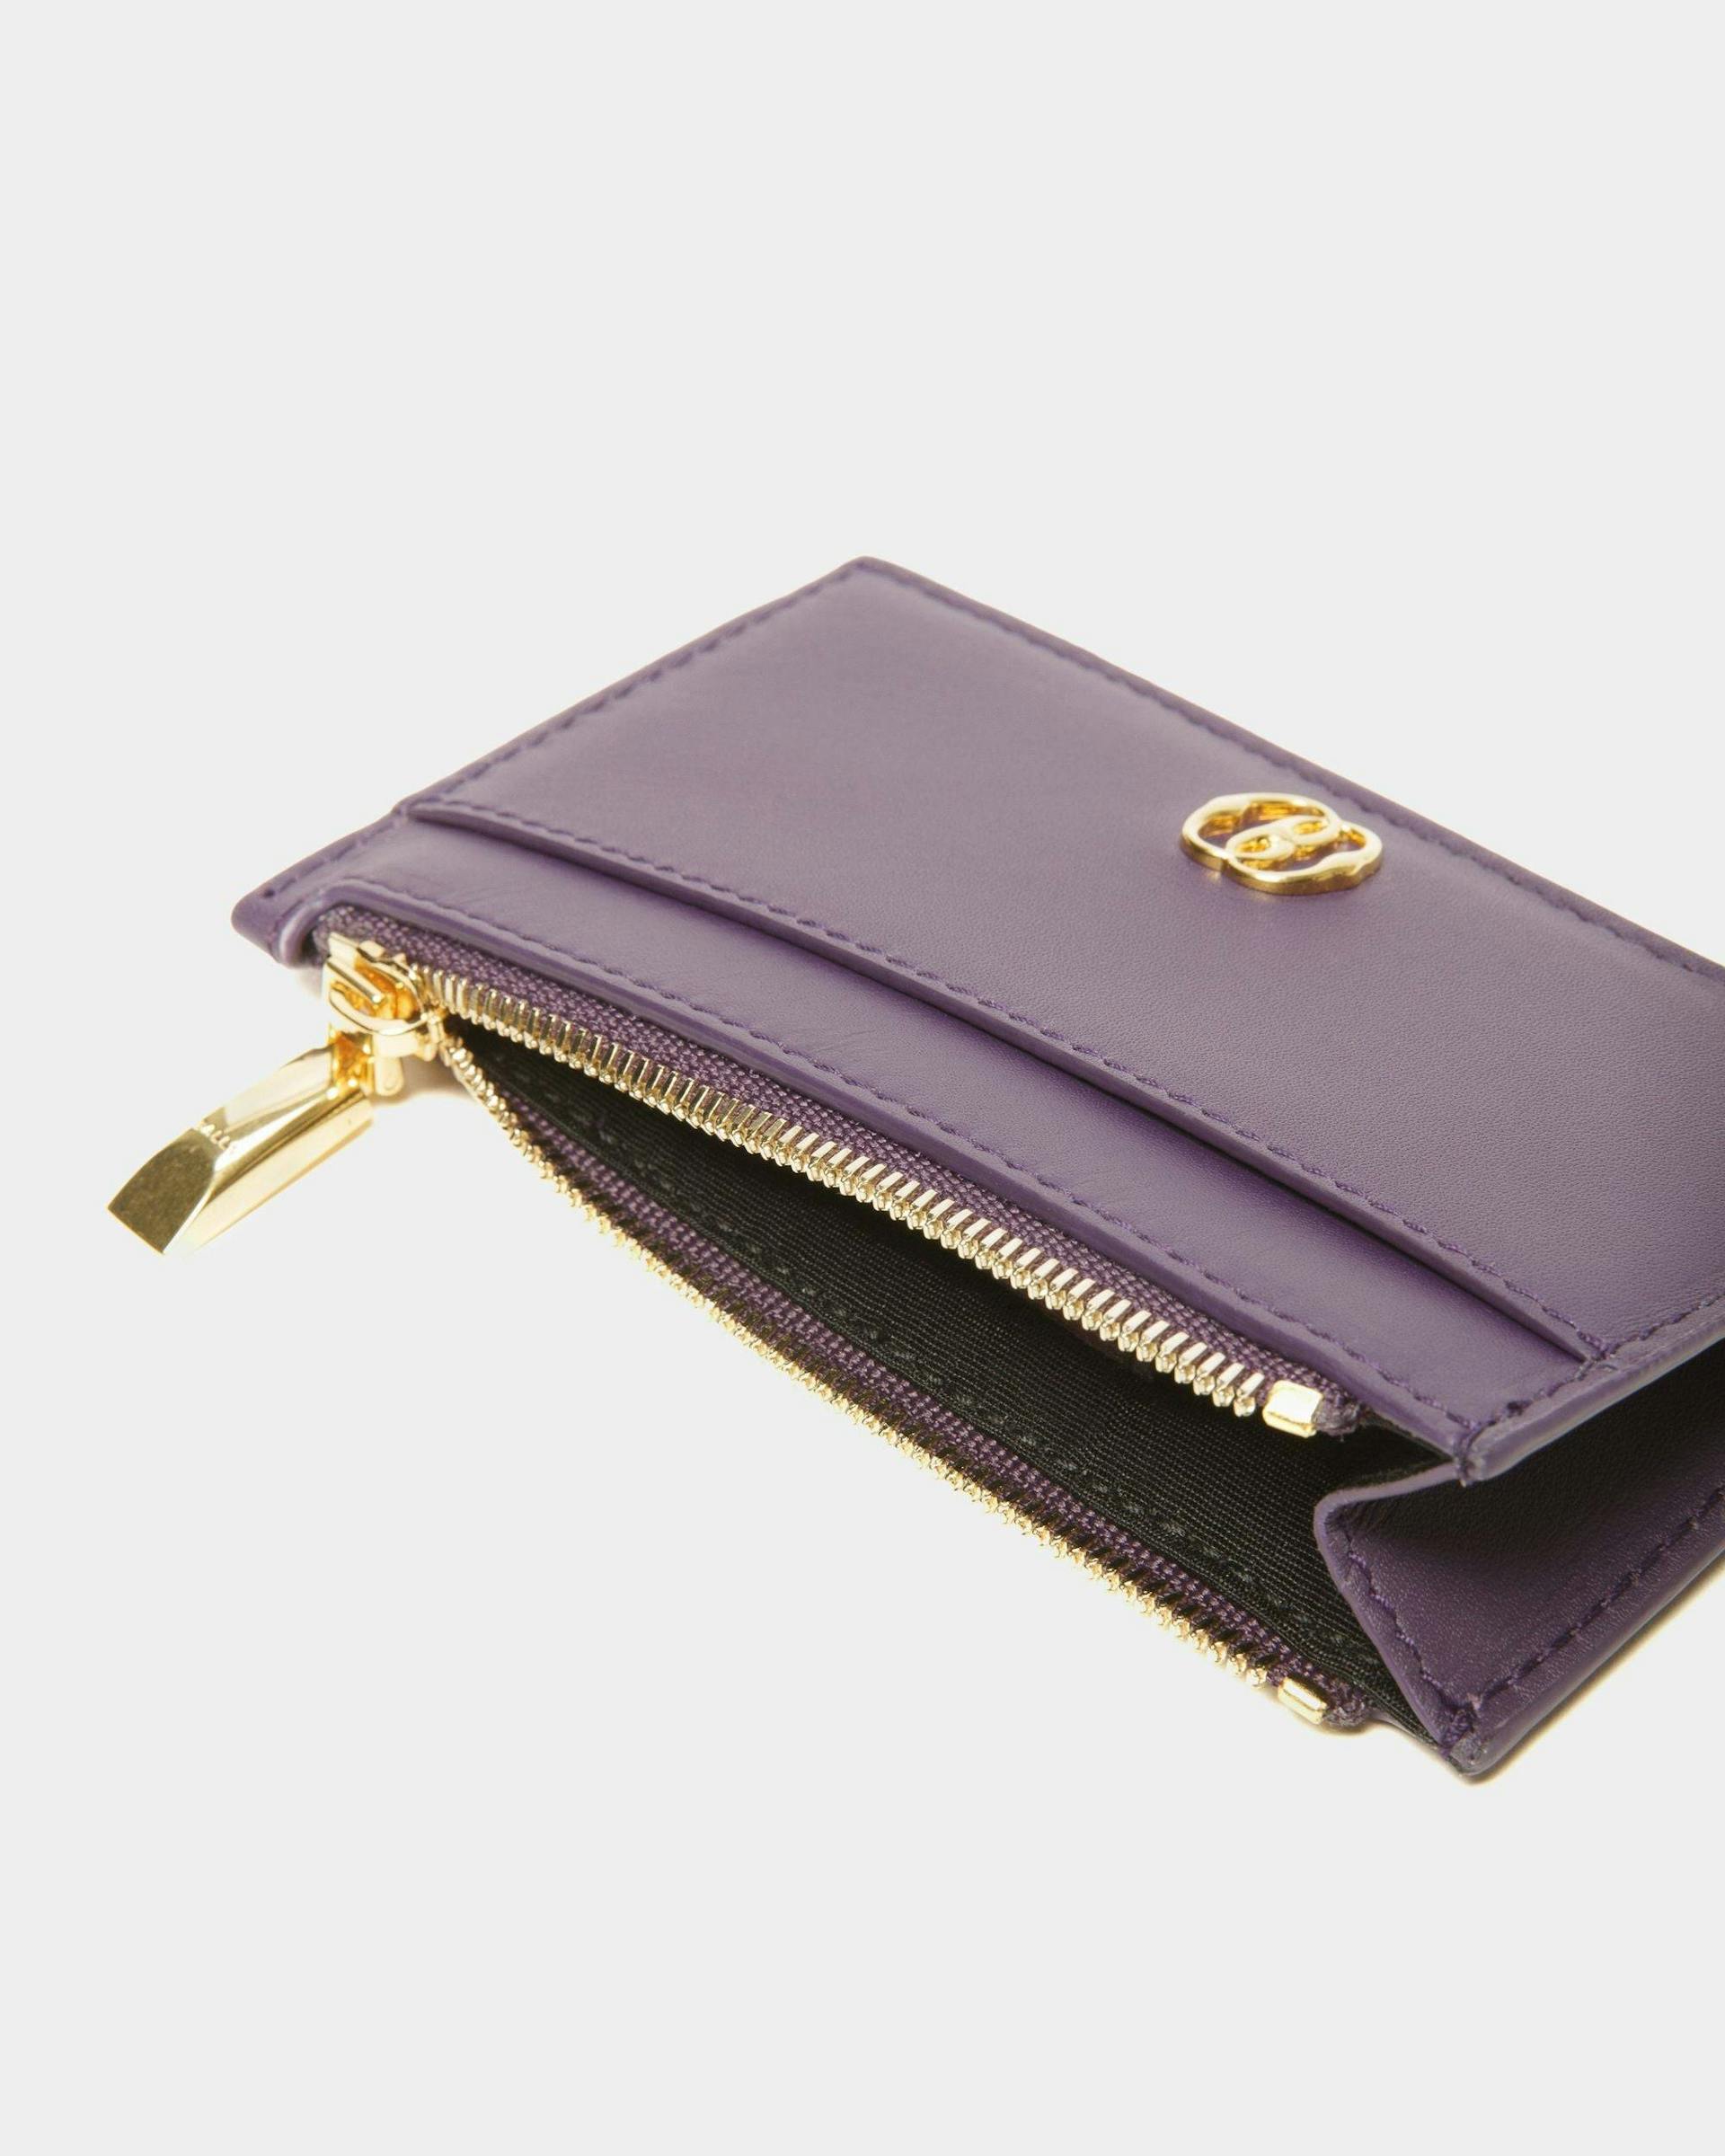 Emblem Business Card Holder In Orchid Leather - Women's - Bally - 04